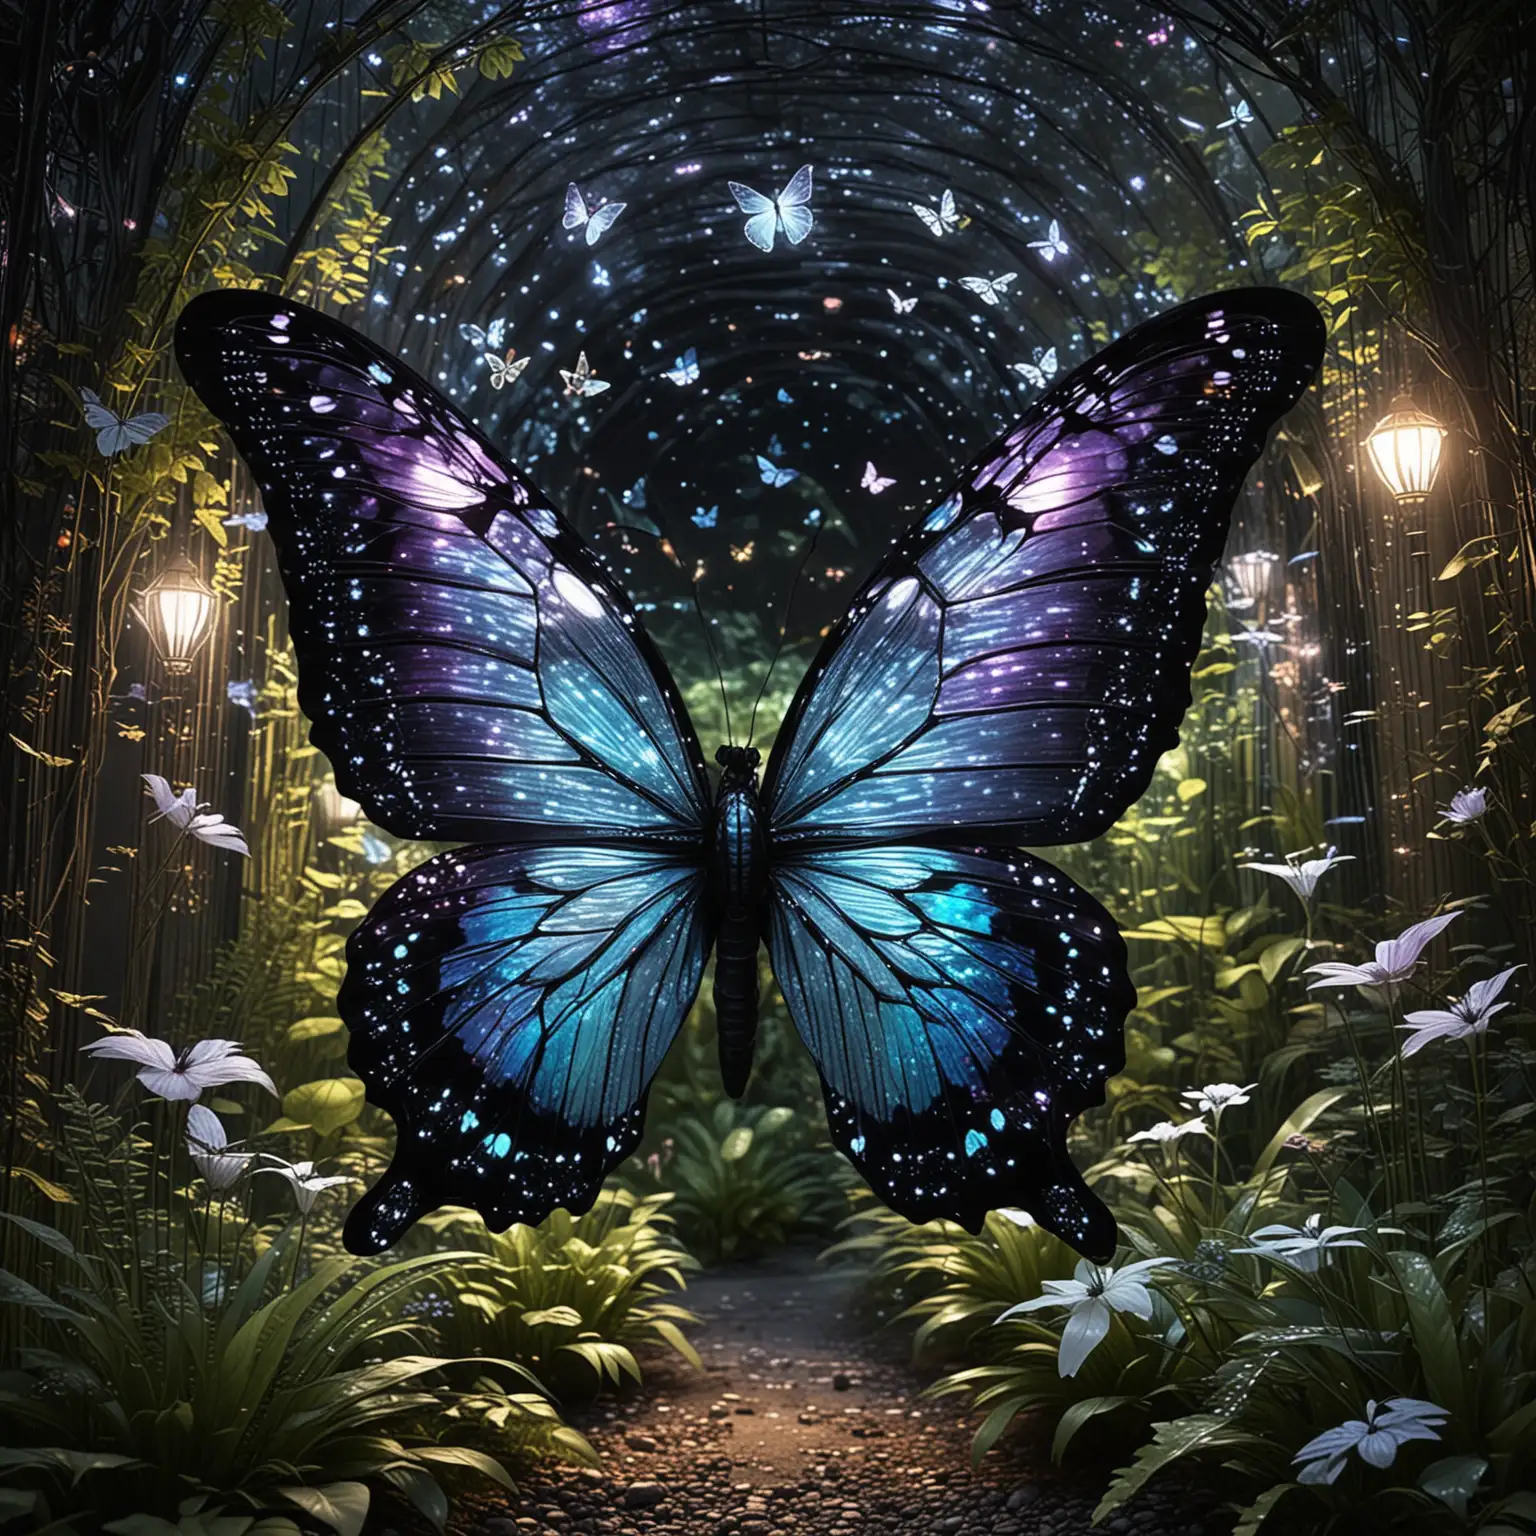 Futuristic Wildlife Oasis. style of a fluttering butterfly garden, blending wildlife sanctuaries with futuristic glowing enhancements, in butterfly wing iridescent and cyber mesh white and black